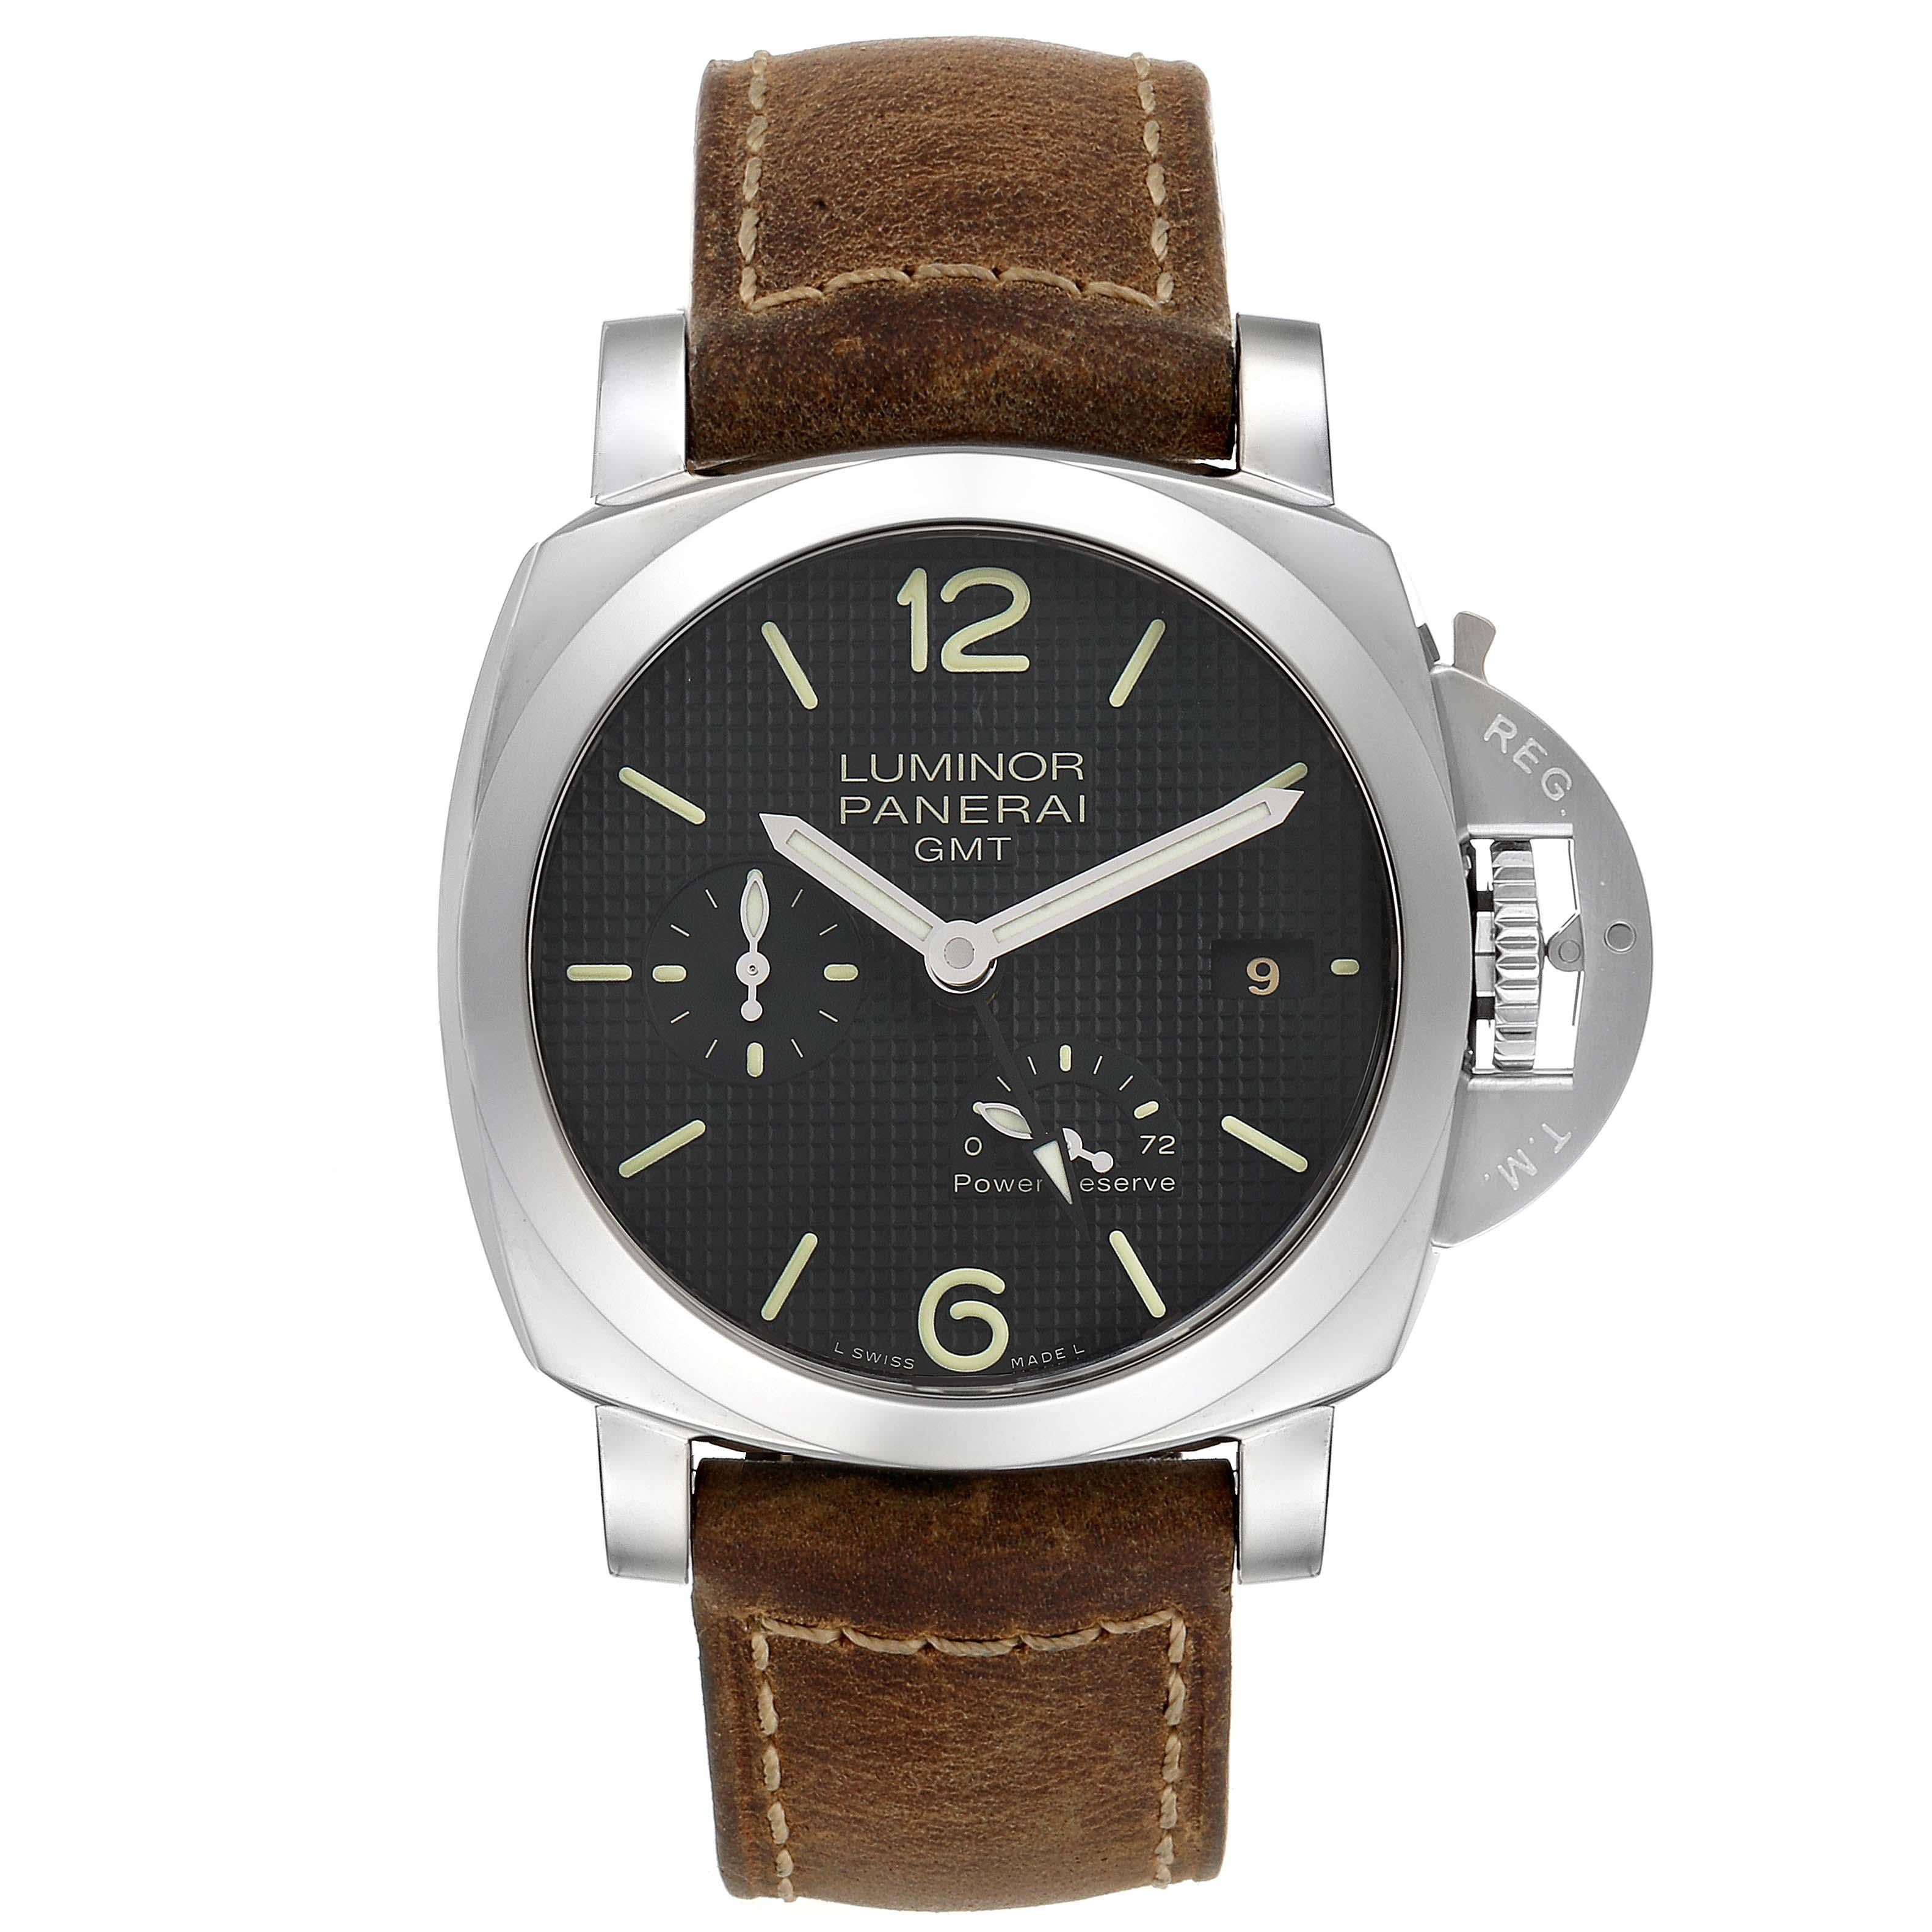 Panerai Luminor 1950 Power Reserve 3 Day GMT Mens Watch PAM00537. Automatic self-winding movement. Caliber P.9002. Two part cushion shaped stainless steel case 42.0 mm in diameter. Brushed Panerai patented crown protector. Polished stainless steel